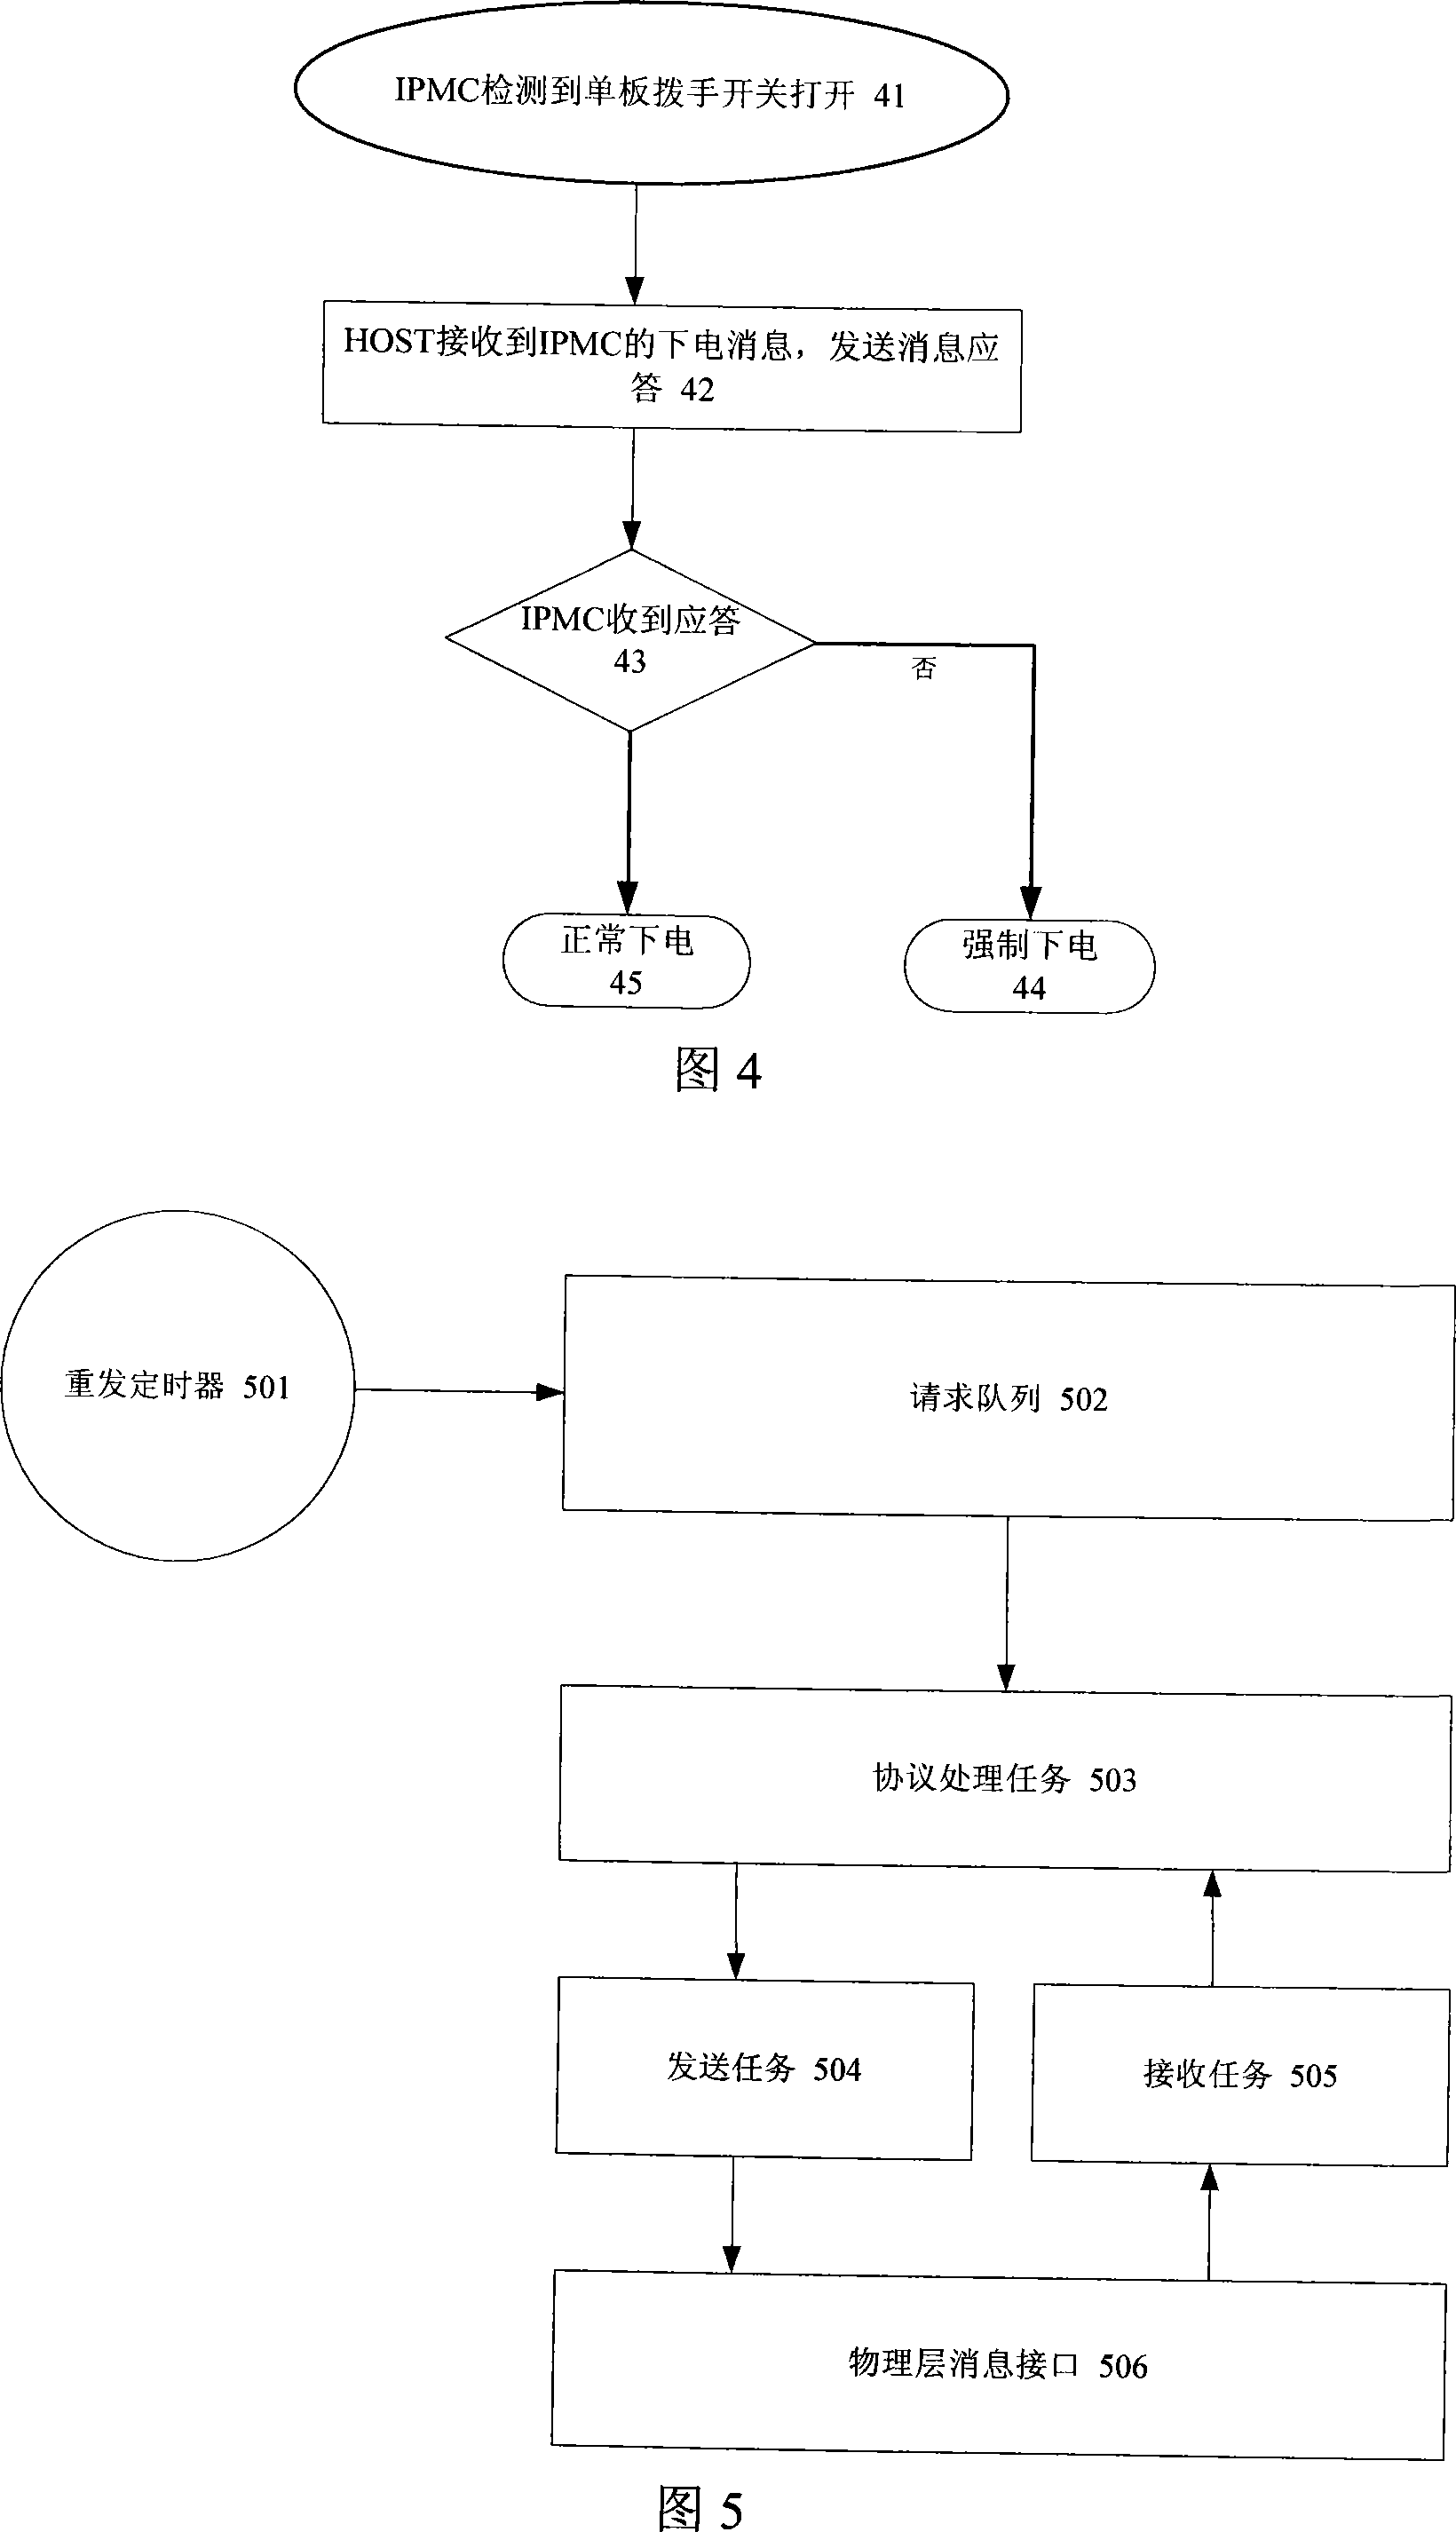 IPMI communication system and dependable communication method